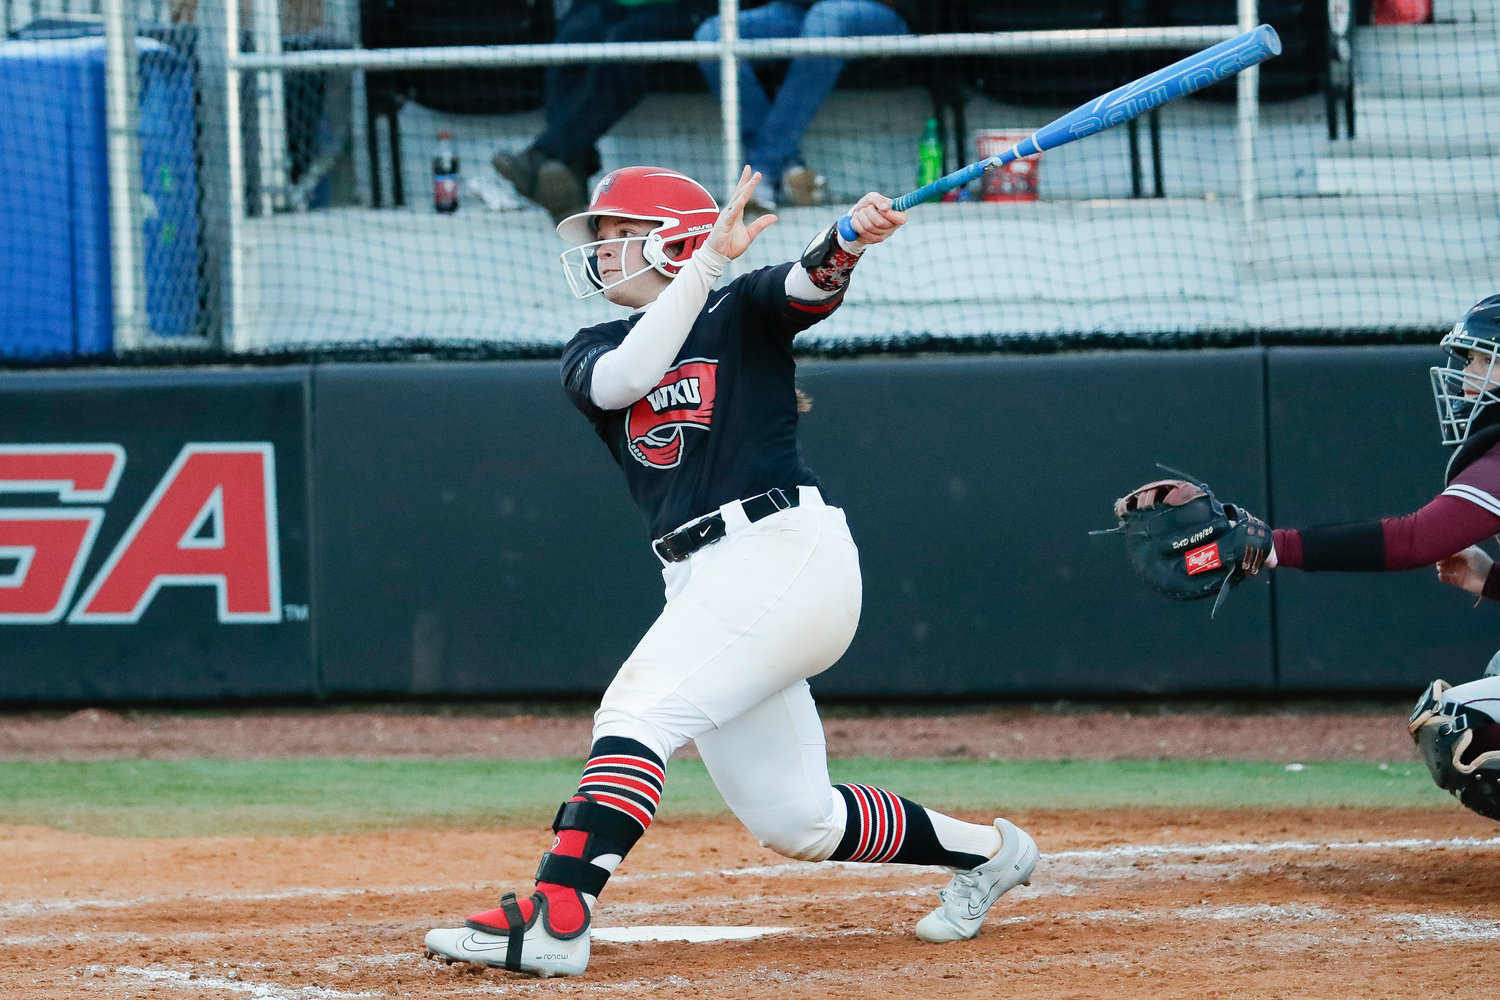 Former Shelbyville Central Golden Eaglette softball standout Taylor Sanders
had a stellar season at Western Kentucky her junior year. She had a .347
batting average and broke a school record with 54 RBIs.